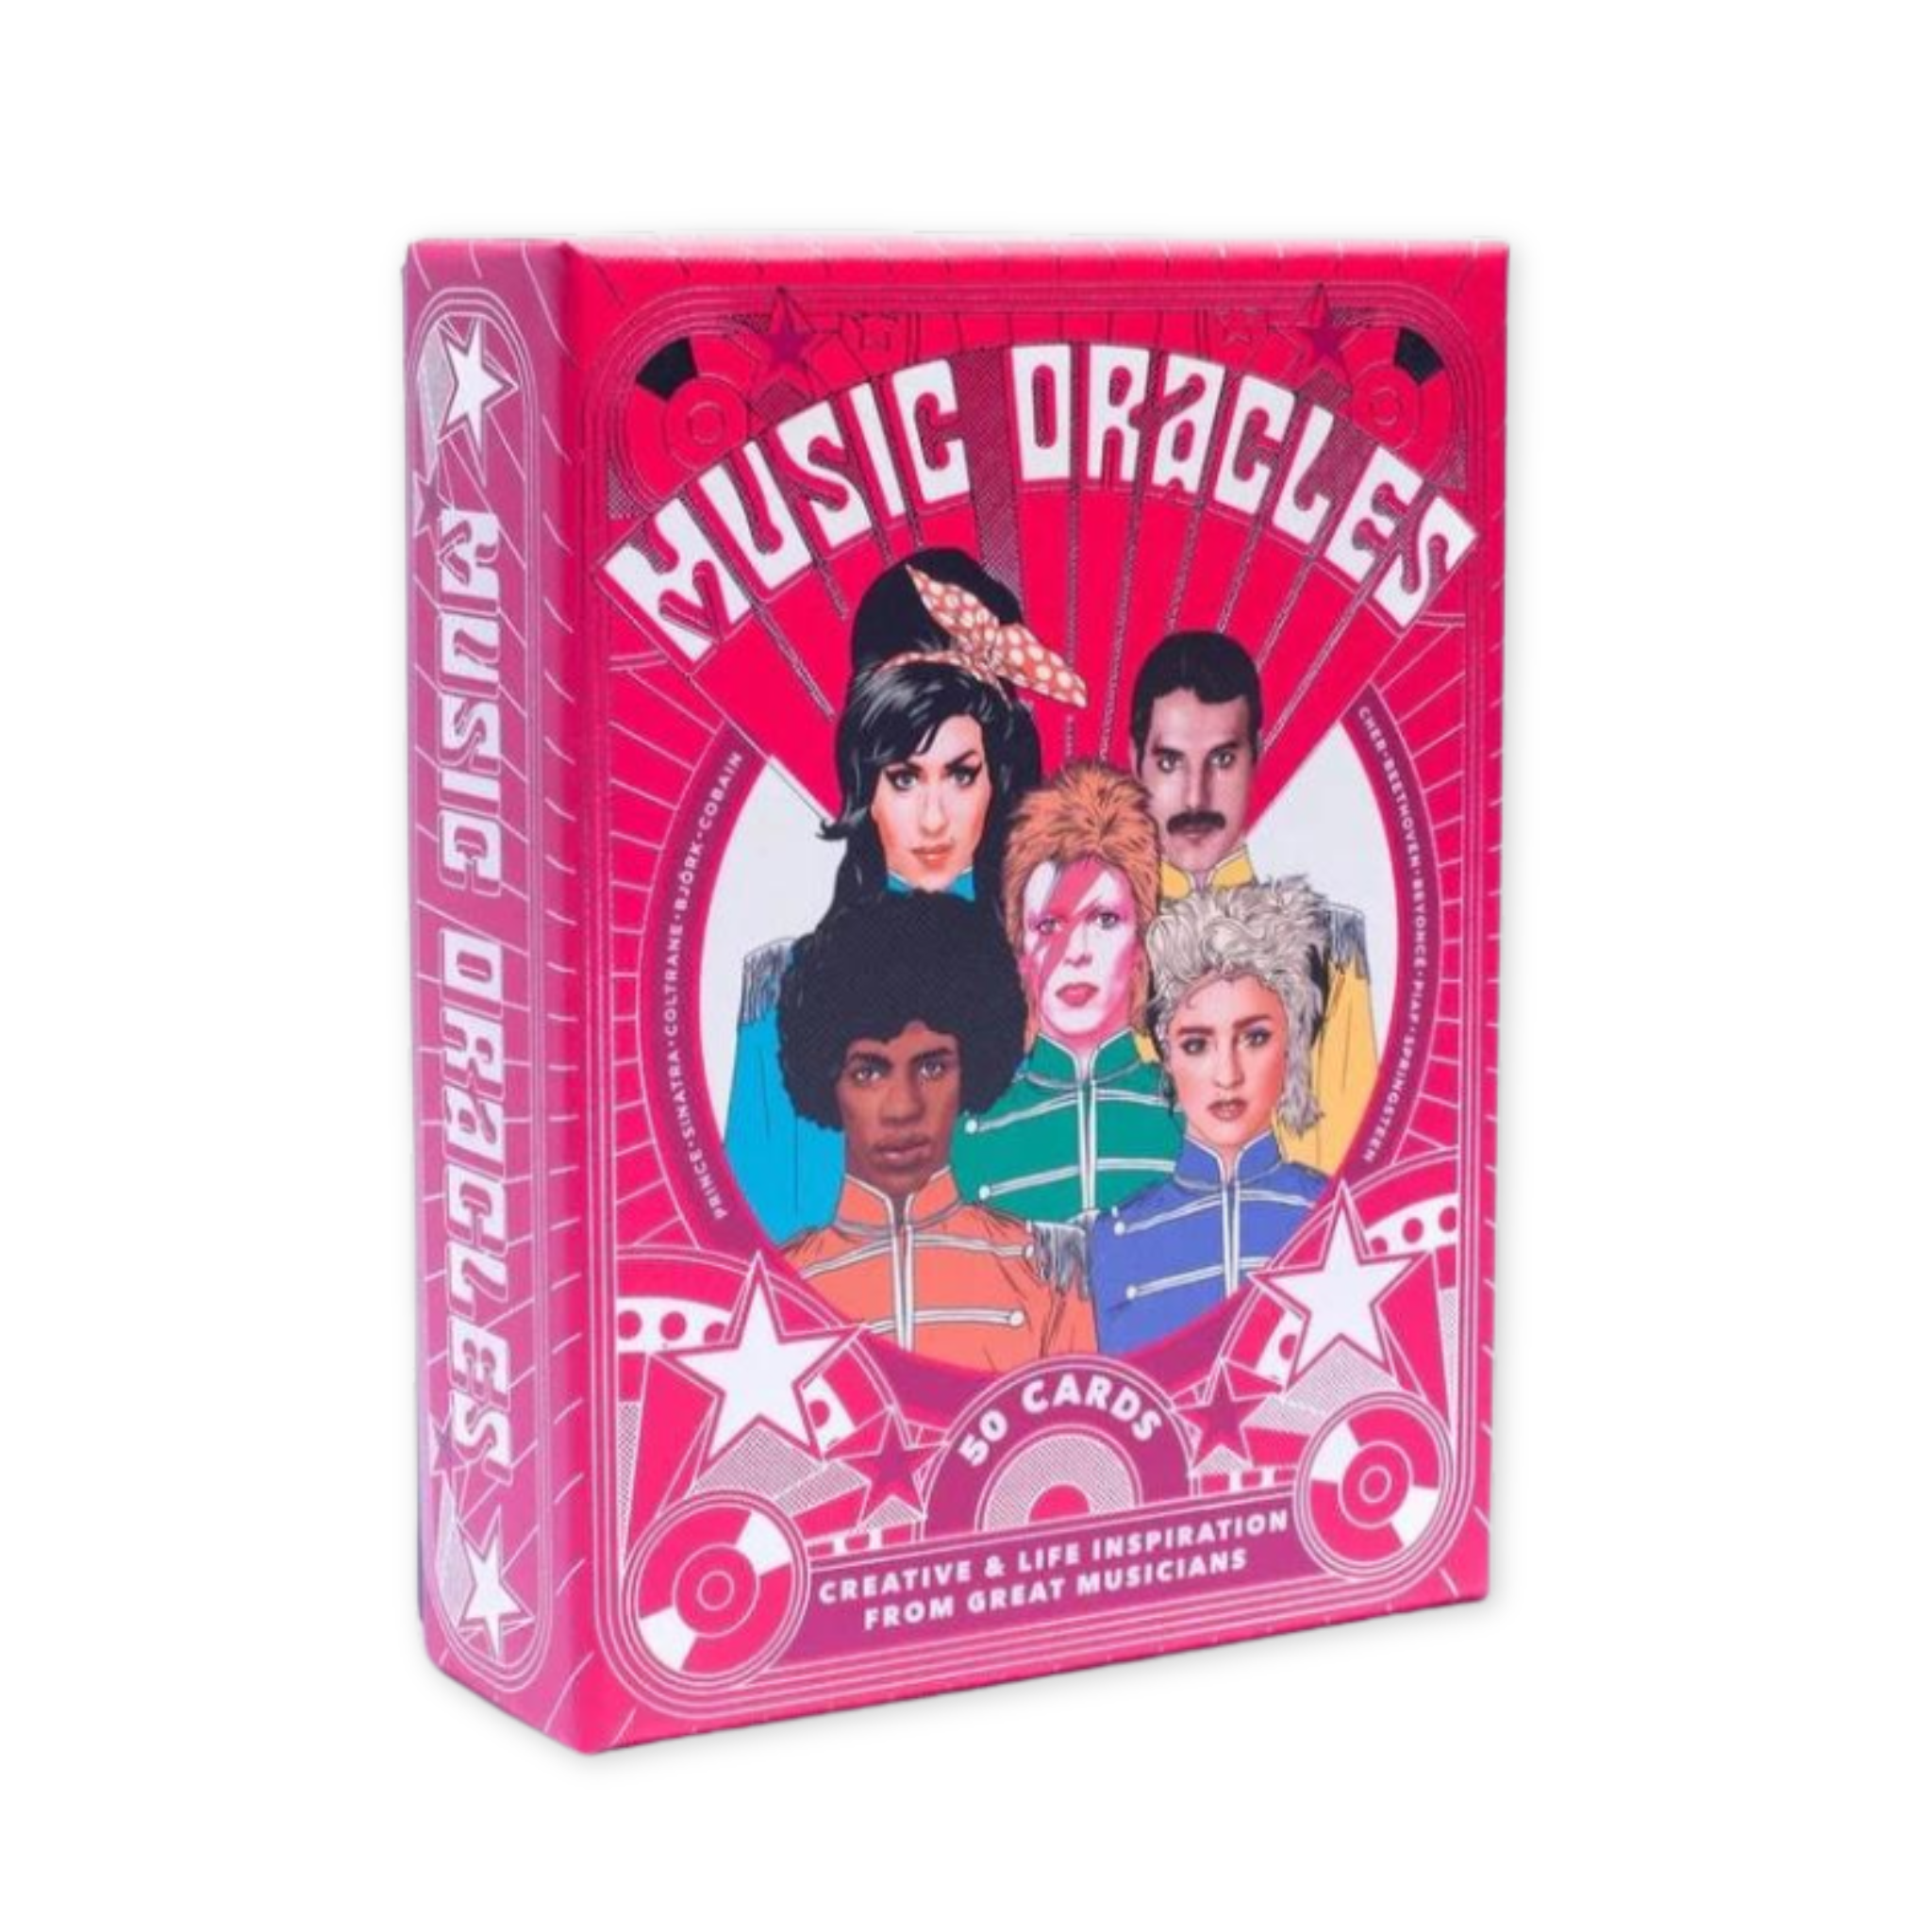 oracle deck inspired by music icons